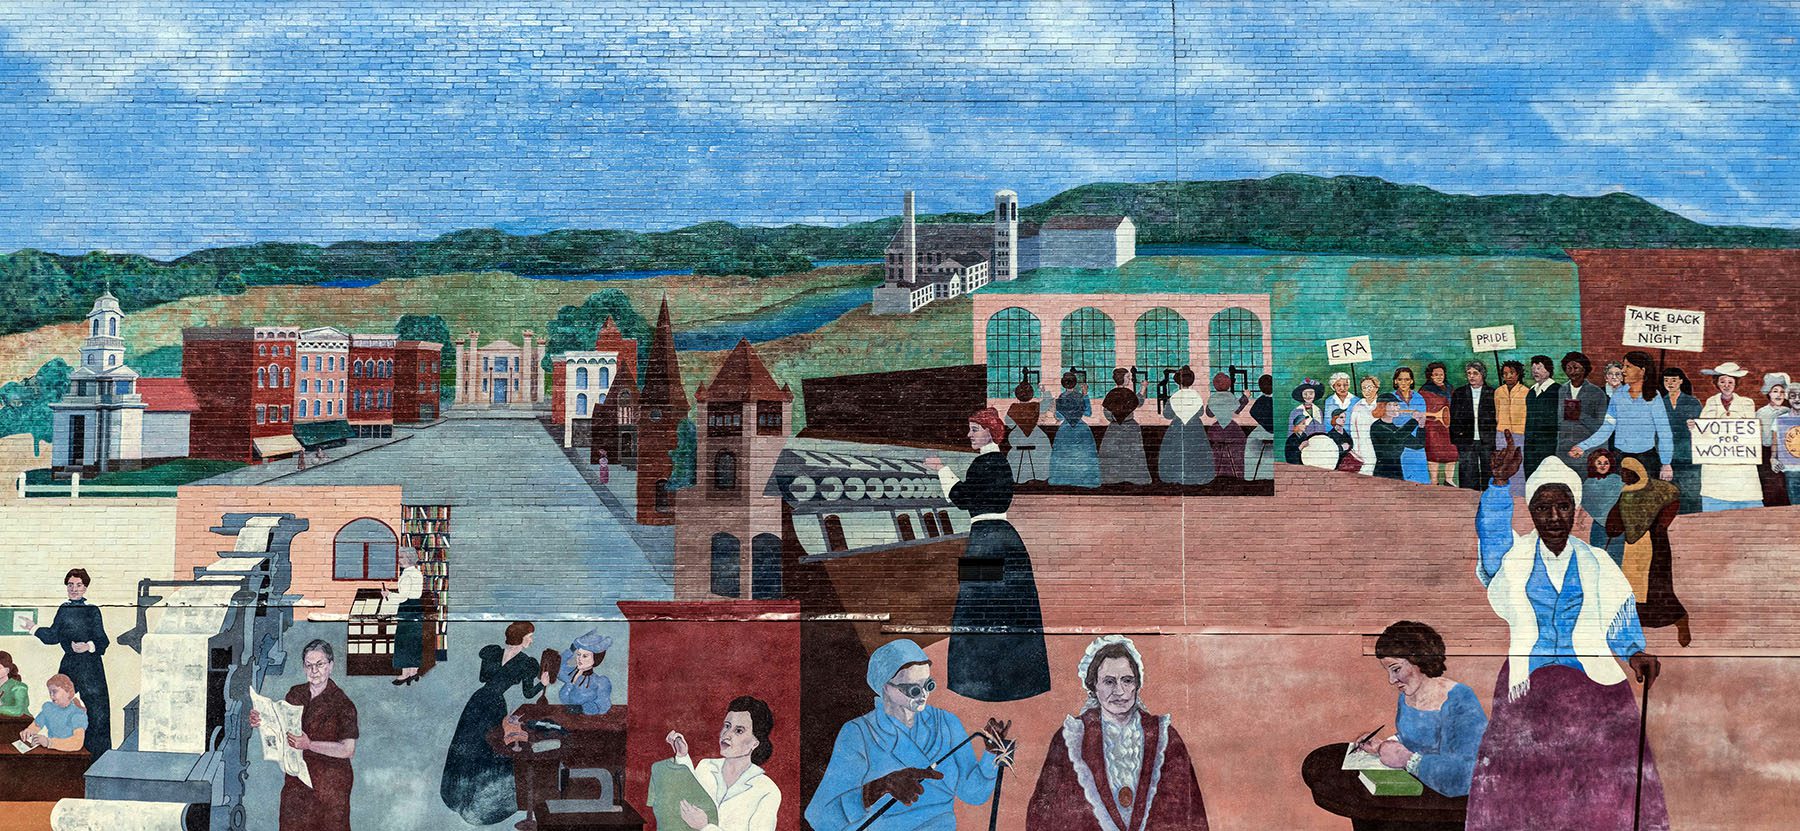 A mural depicts the town of Northampton. All around the town are women; some paint, write, read and others hold signs in protest.